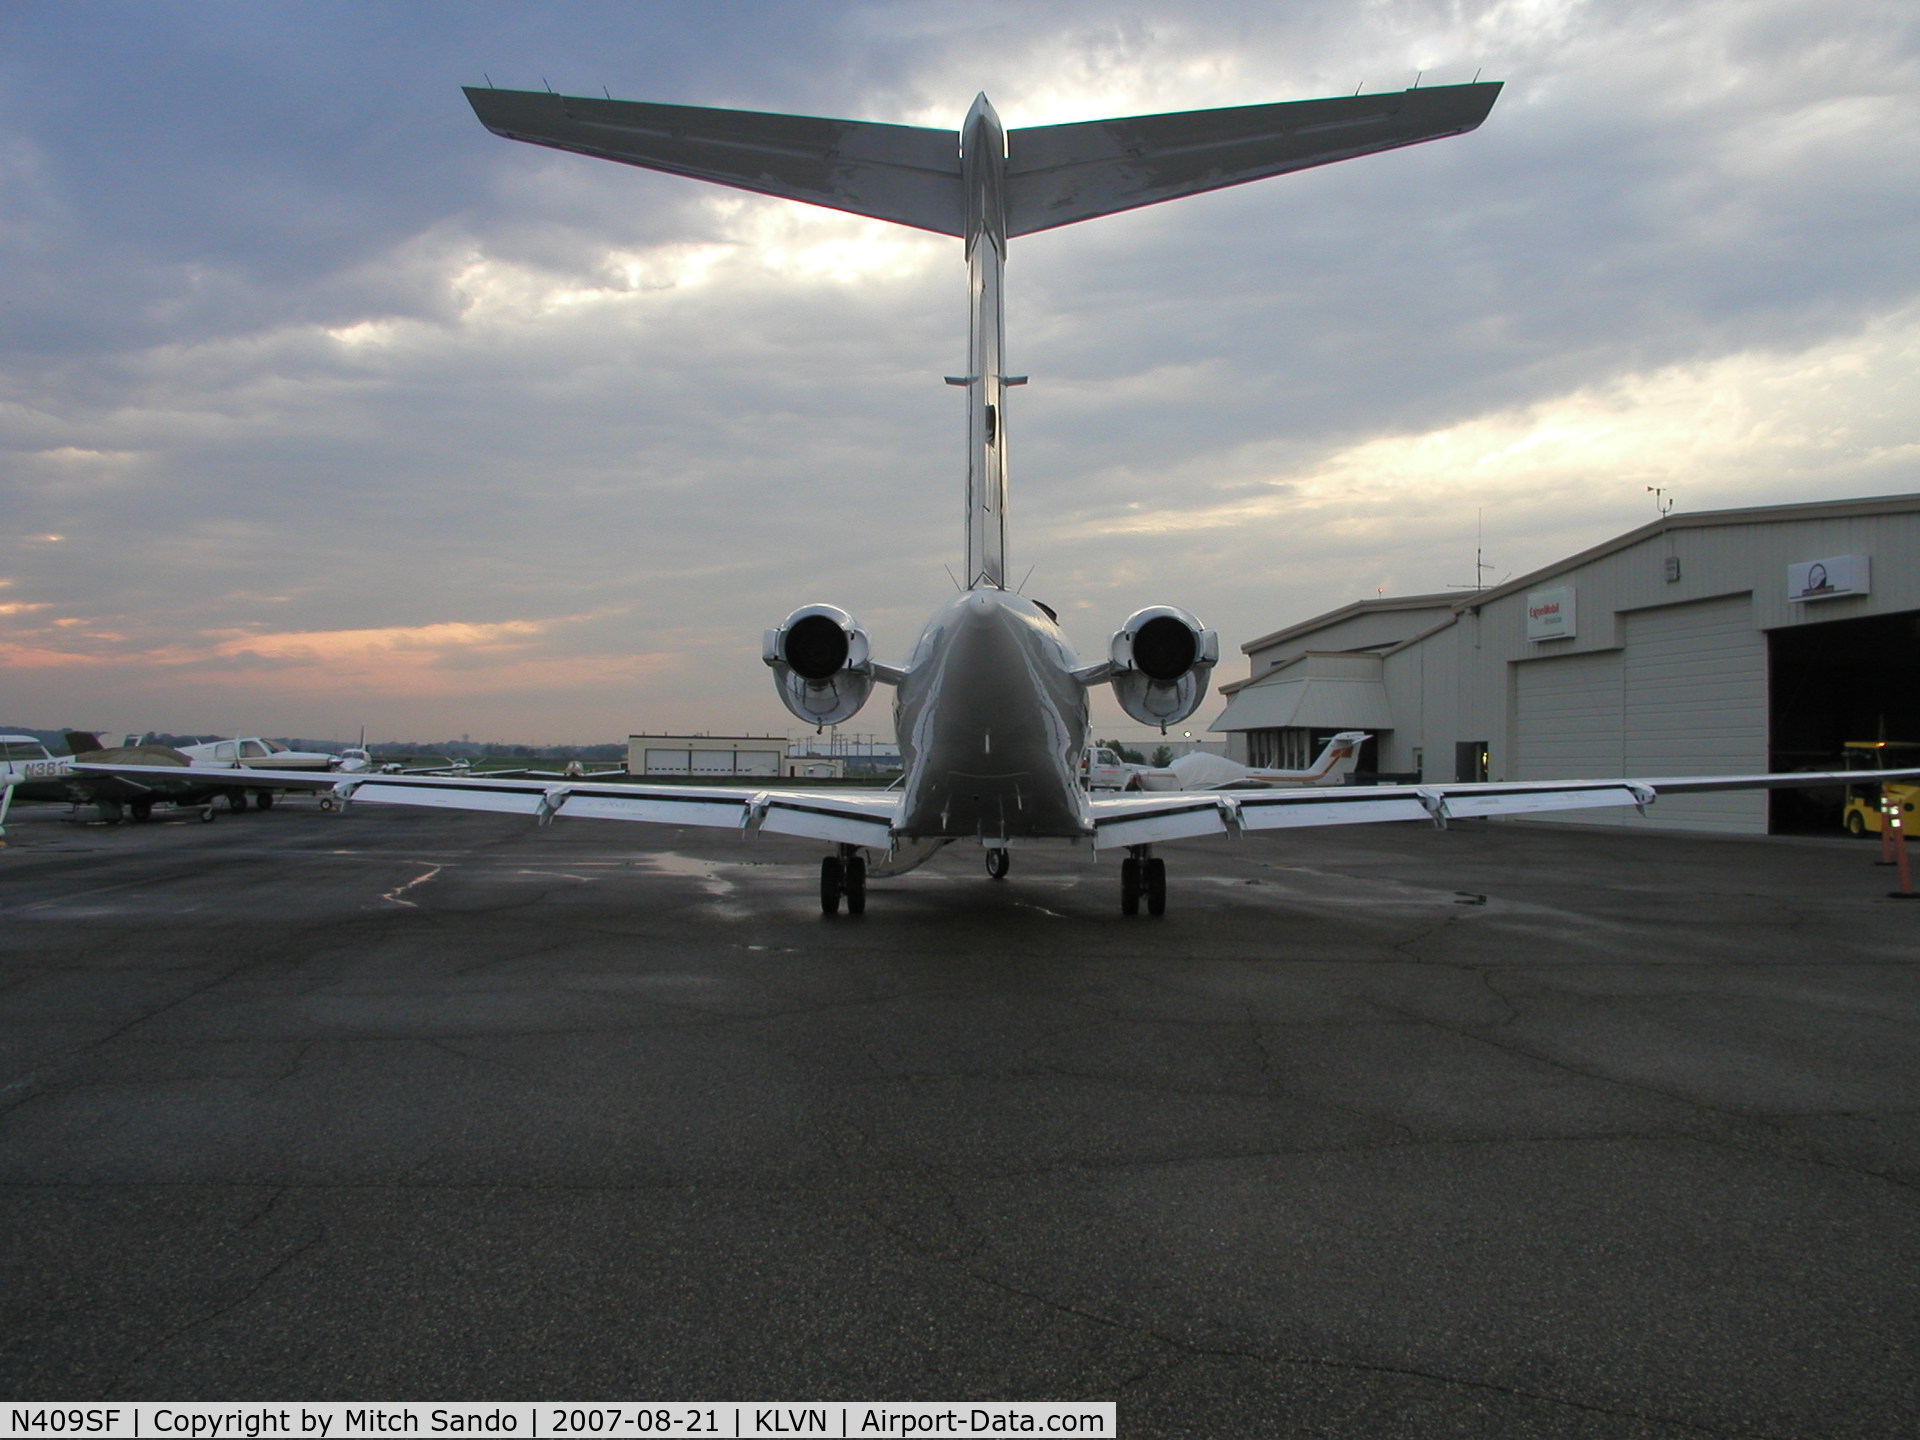 N409SF, 1984 Cessna 650 Citation C/N 650-0029, View from the back of 409SF.